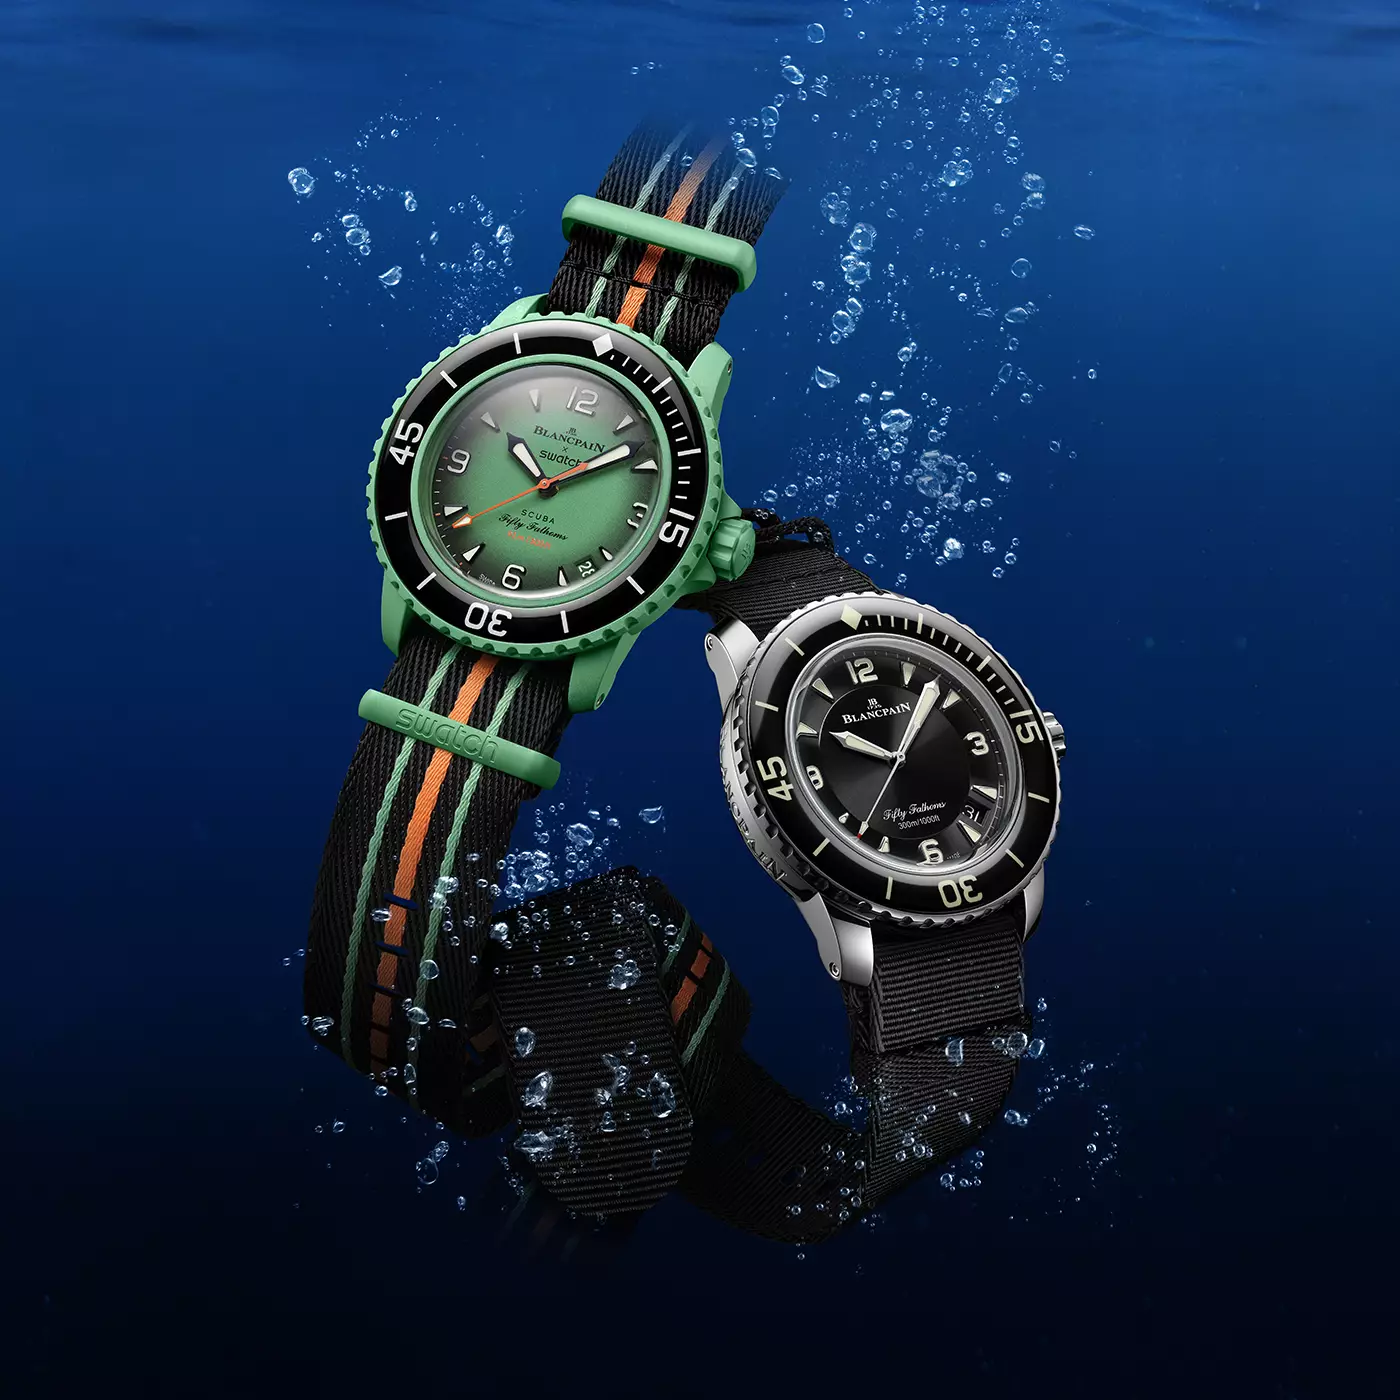 Blancpain X Swatch Bioceramic Scuba Fifty Fathoms Hit Stores on 9th September